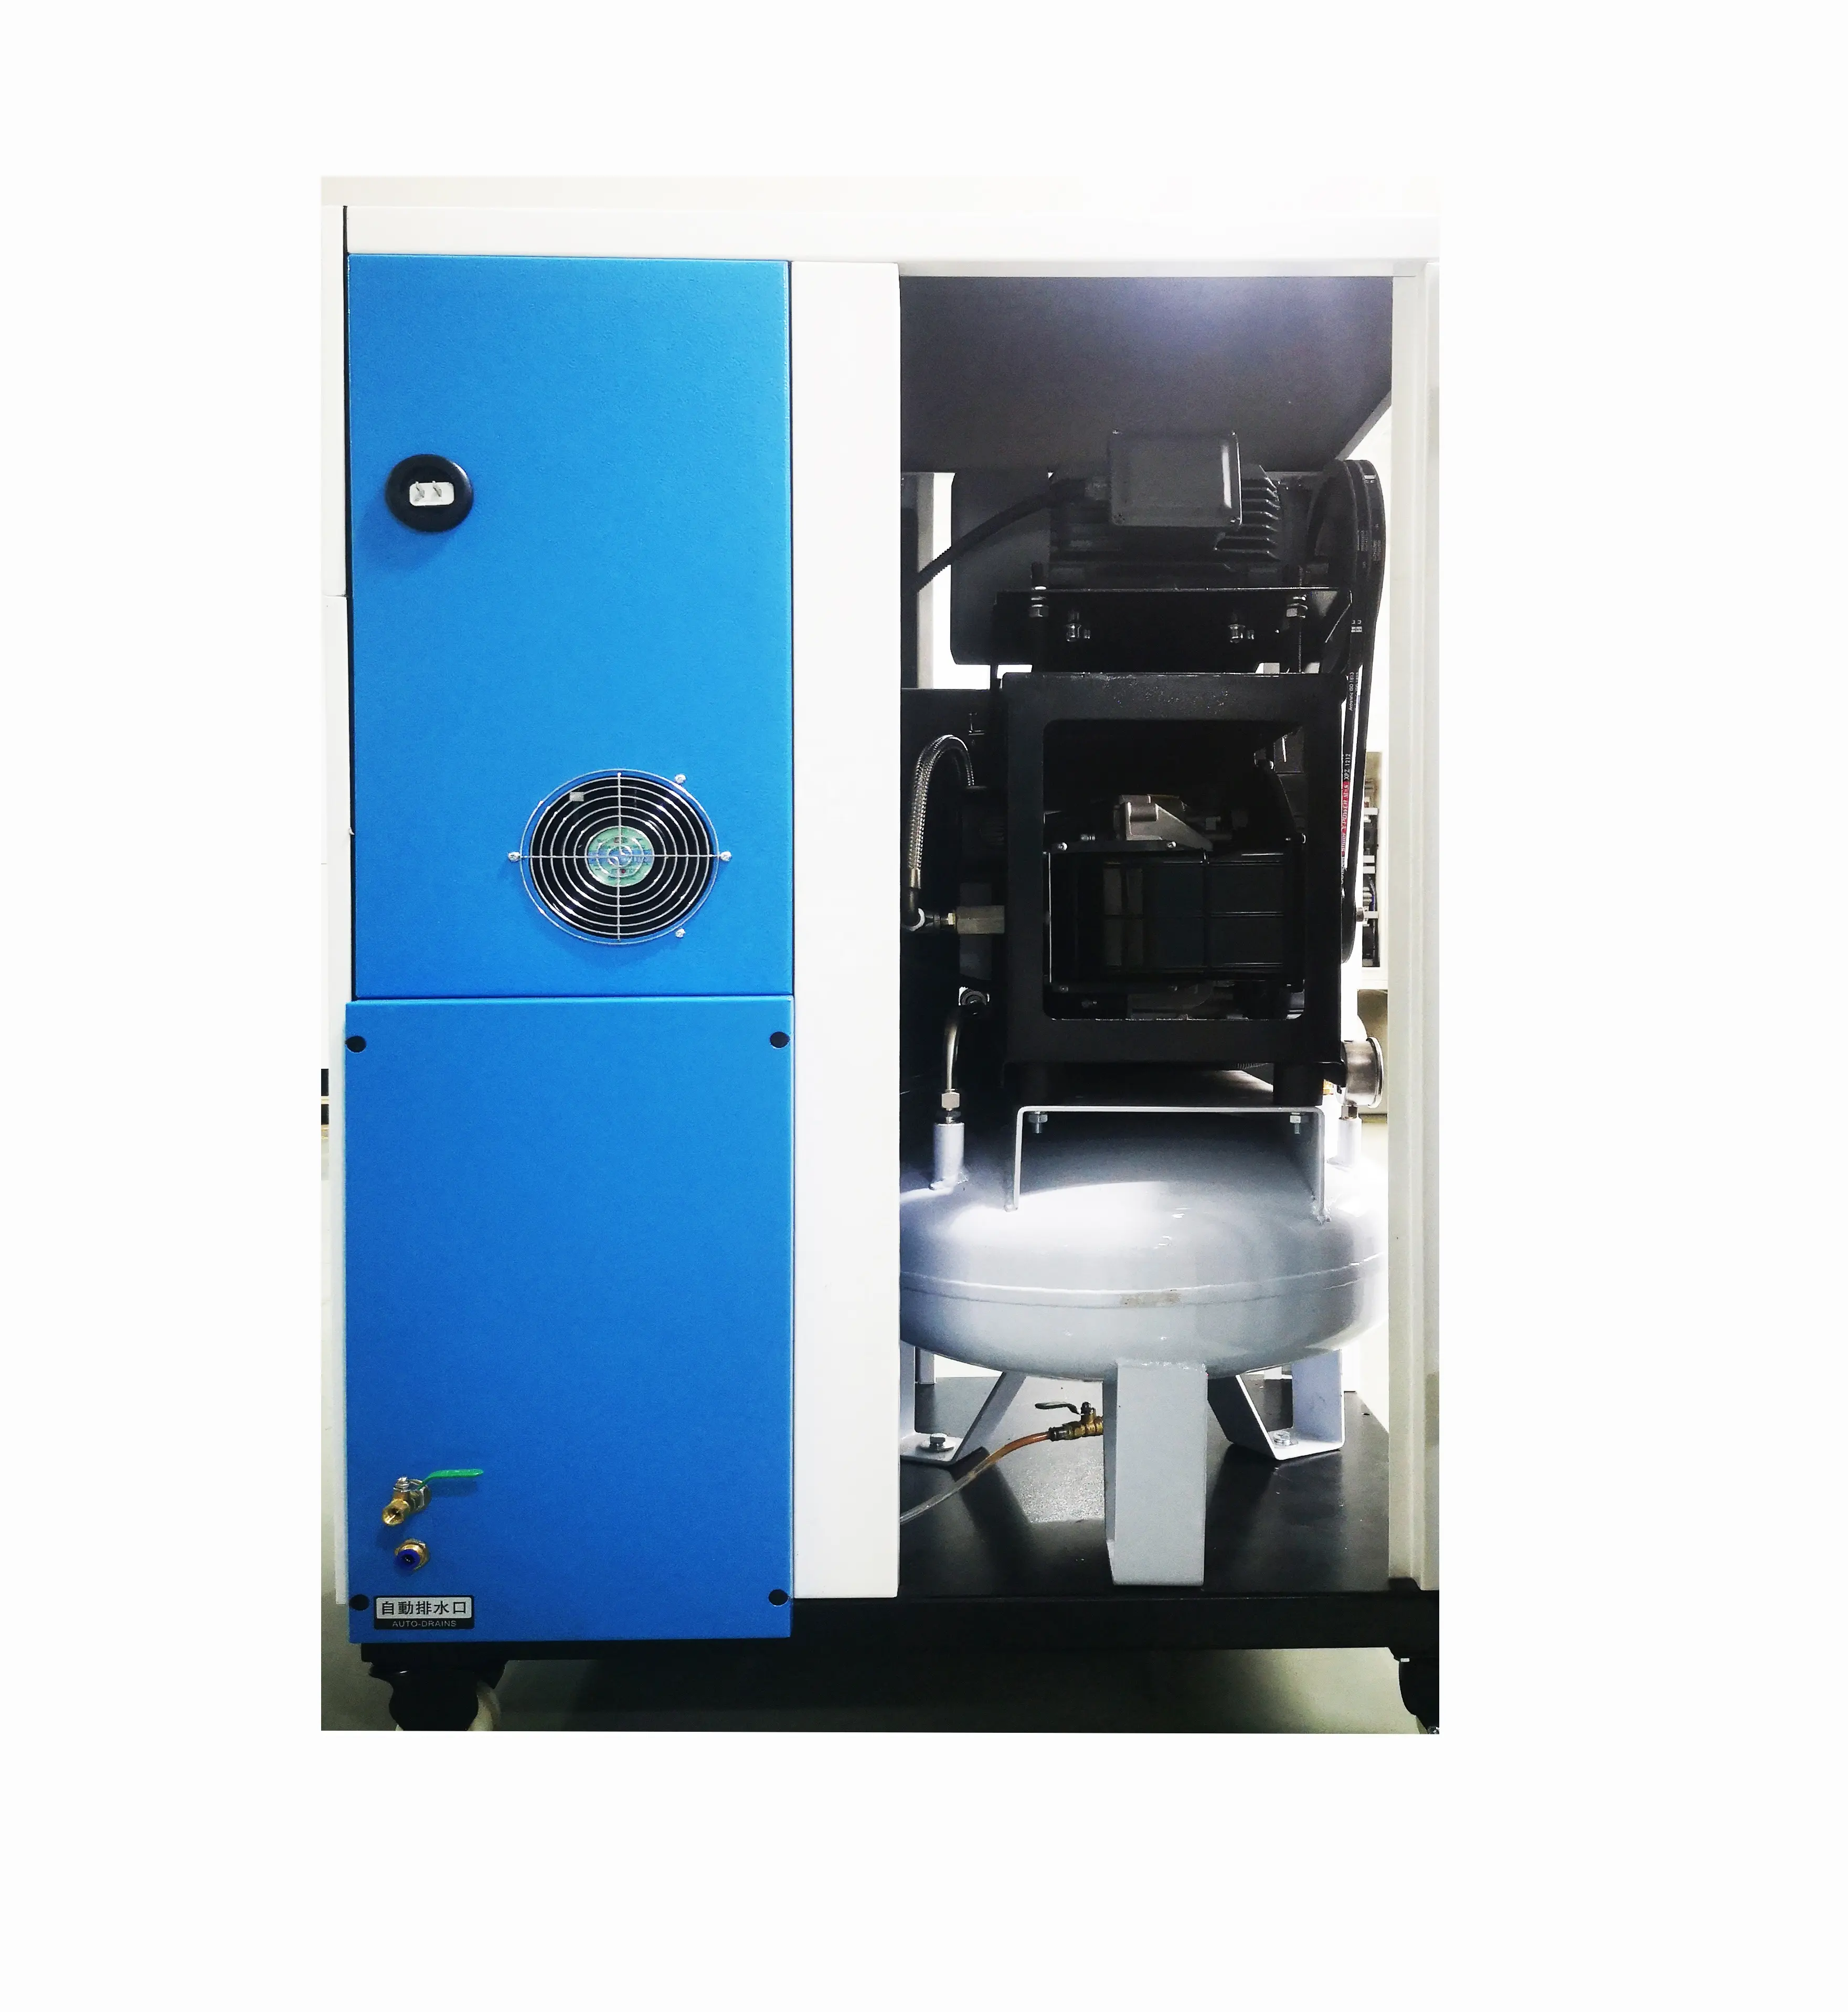 China Supplier Air-compressor Machines Industrial Belt Driven Oil Free Scroll Air Compressor with Refrigerant Air Dryer